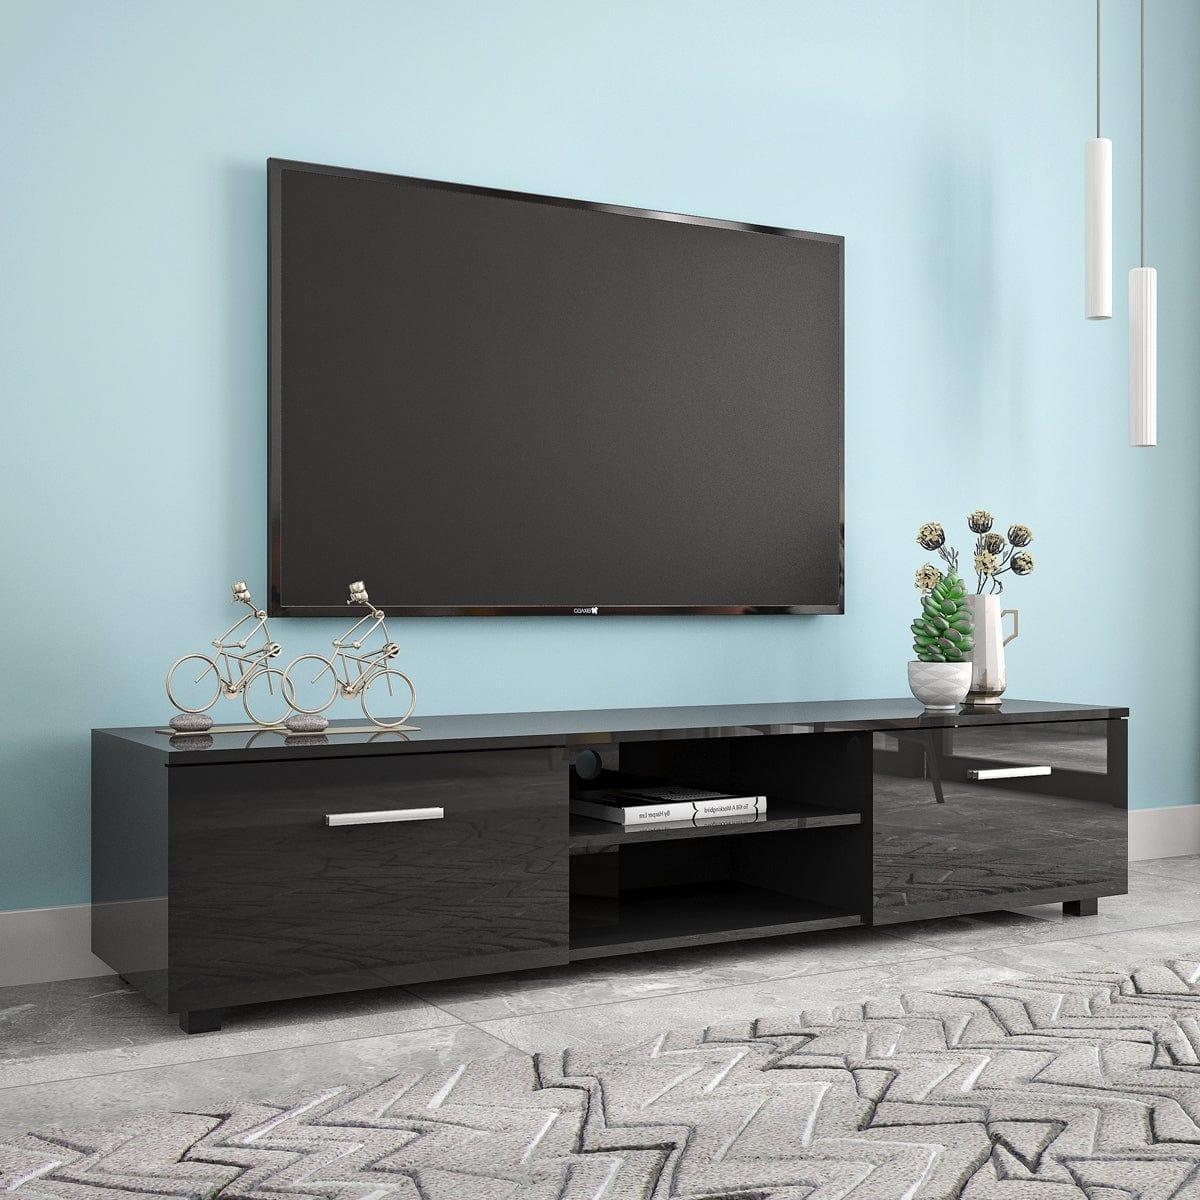 Shop Black TV Stand for 70 Inch TV Stands, Media Console Entertainment Center Television Table, 2 Storage Cabinet with Open Shelves for Living Room Bedroom Mademoiselle Home Decor